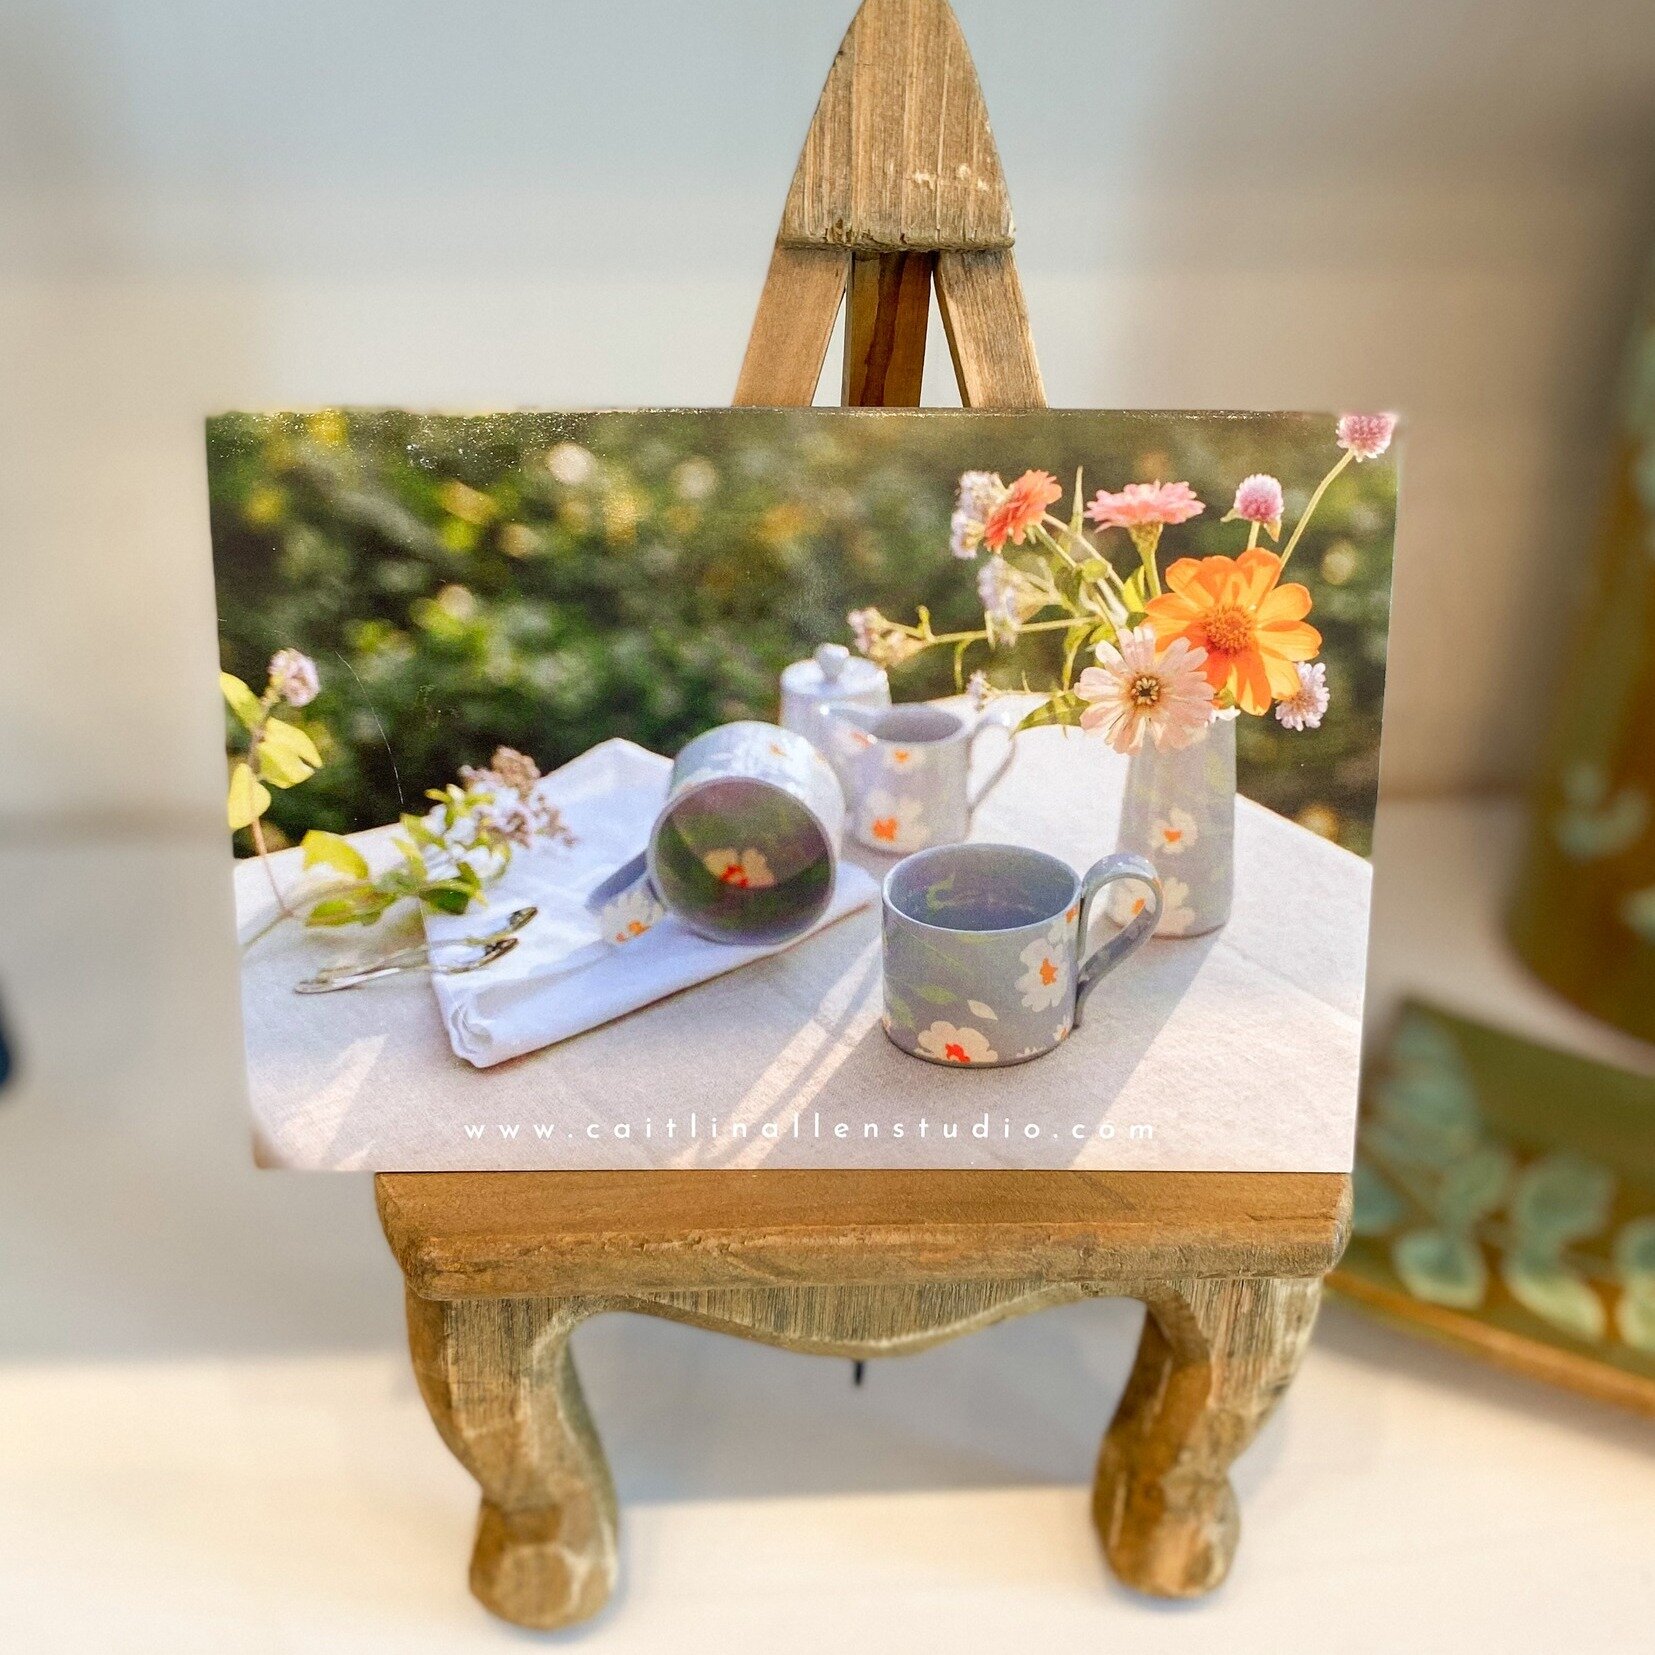 Small Business Highlight! 
These beautiful pieces are the works of Caitlin Allen. Caitlin is an educator, plein air painter, and ceramic artist. She delights in vast skies, quiet trails, and summer blossoms in her garden. She currently works from her